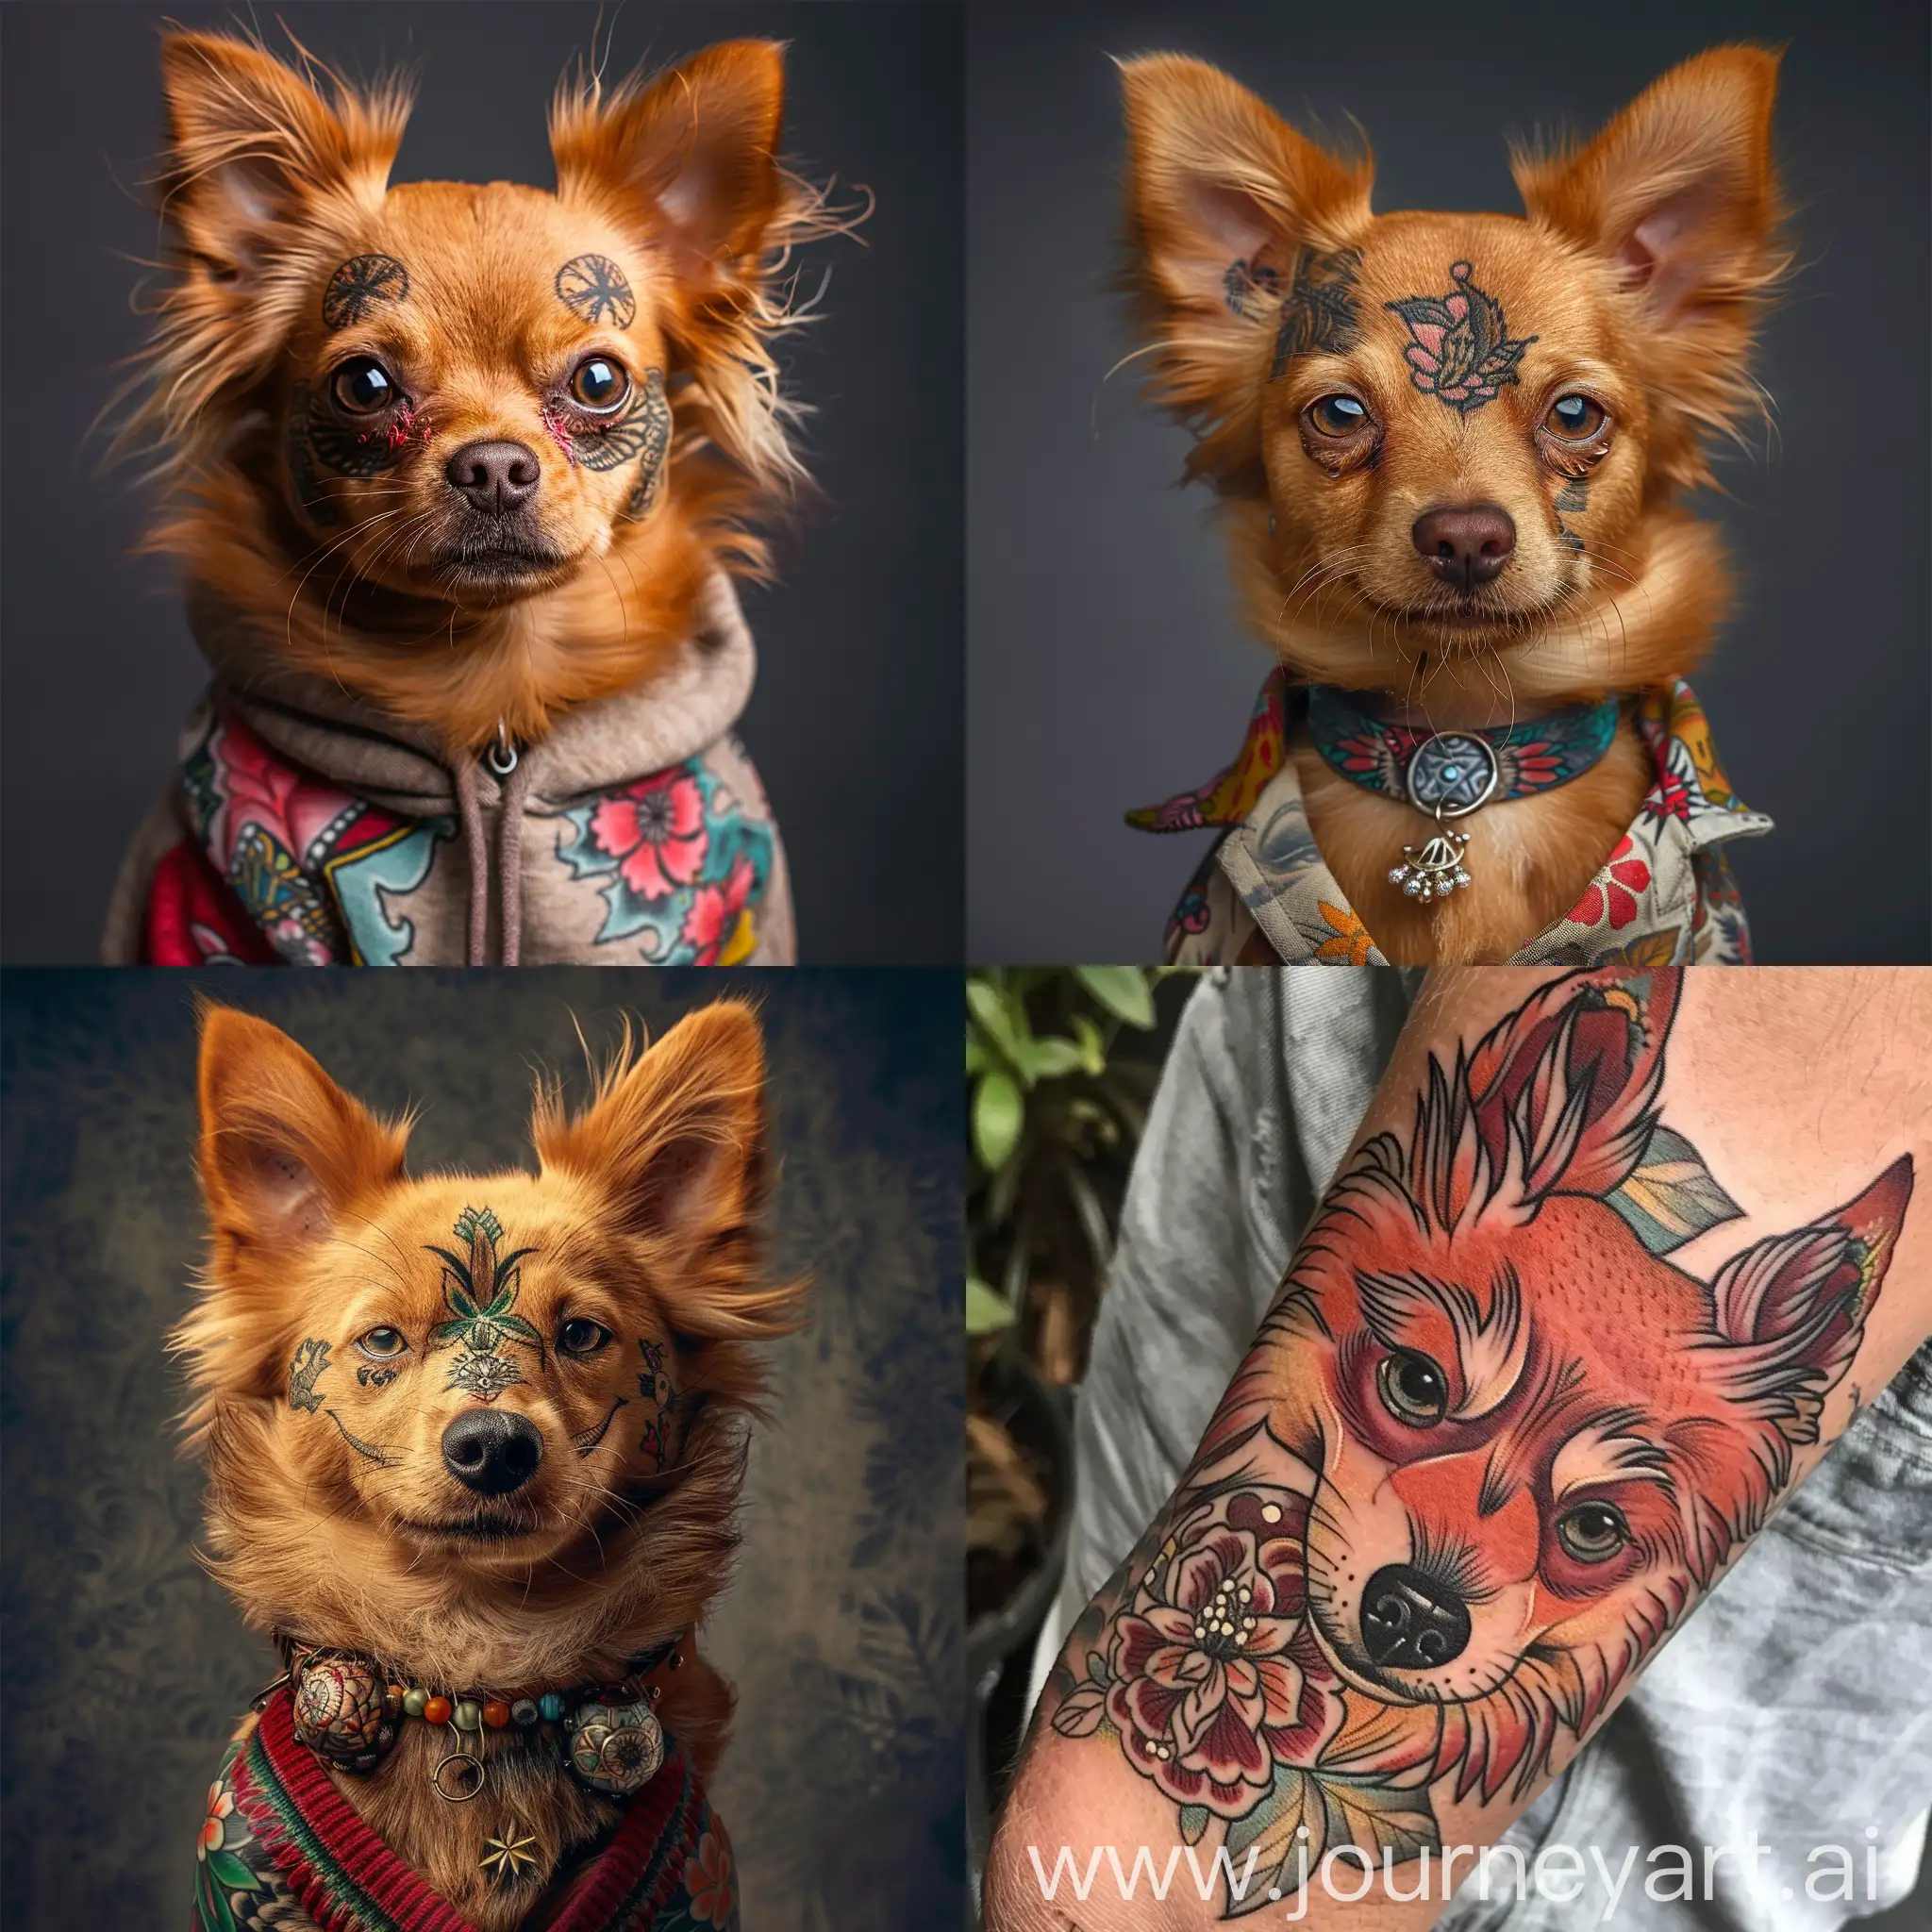 Red-Spitz-Dog-with-Intriguing-Tattoos